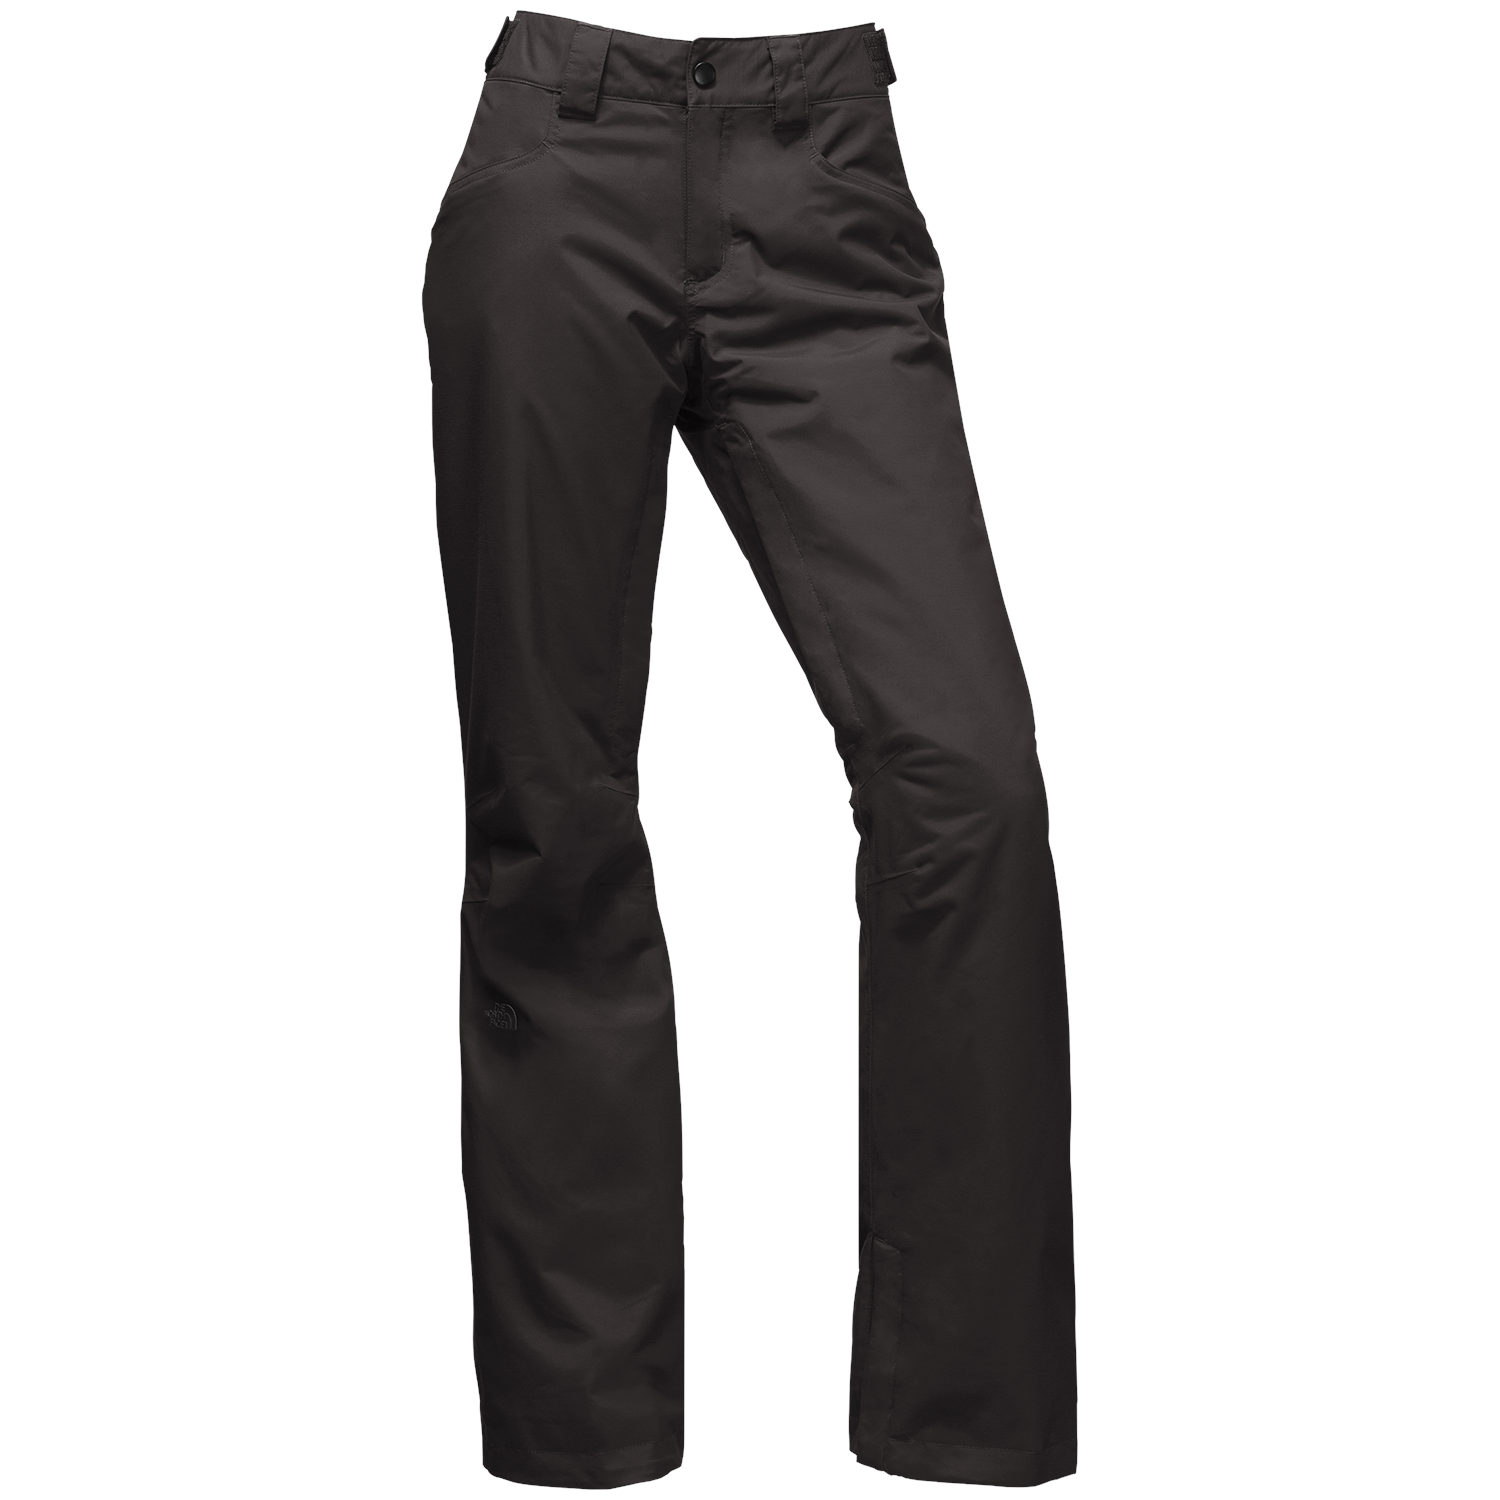 The North Face Aboutaday Pants - Women's